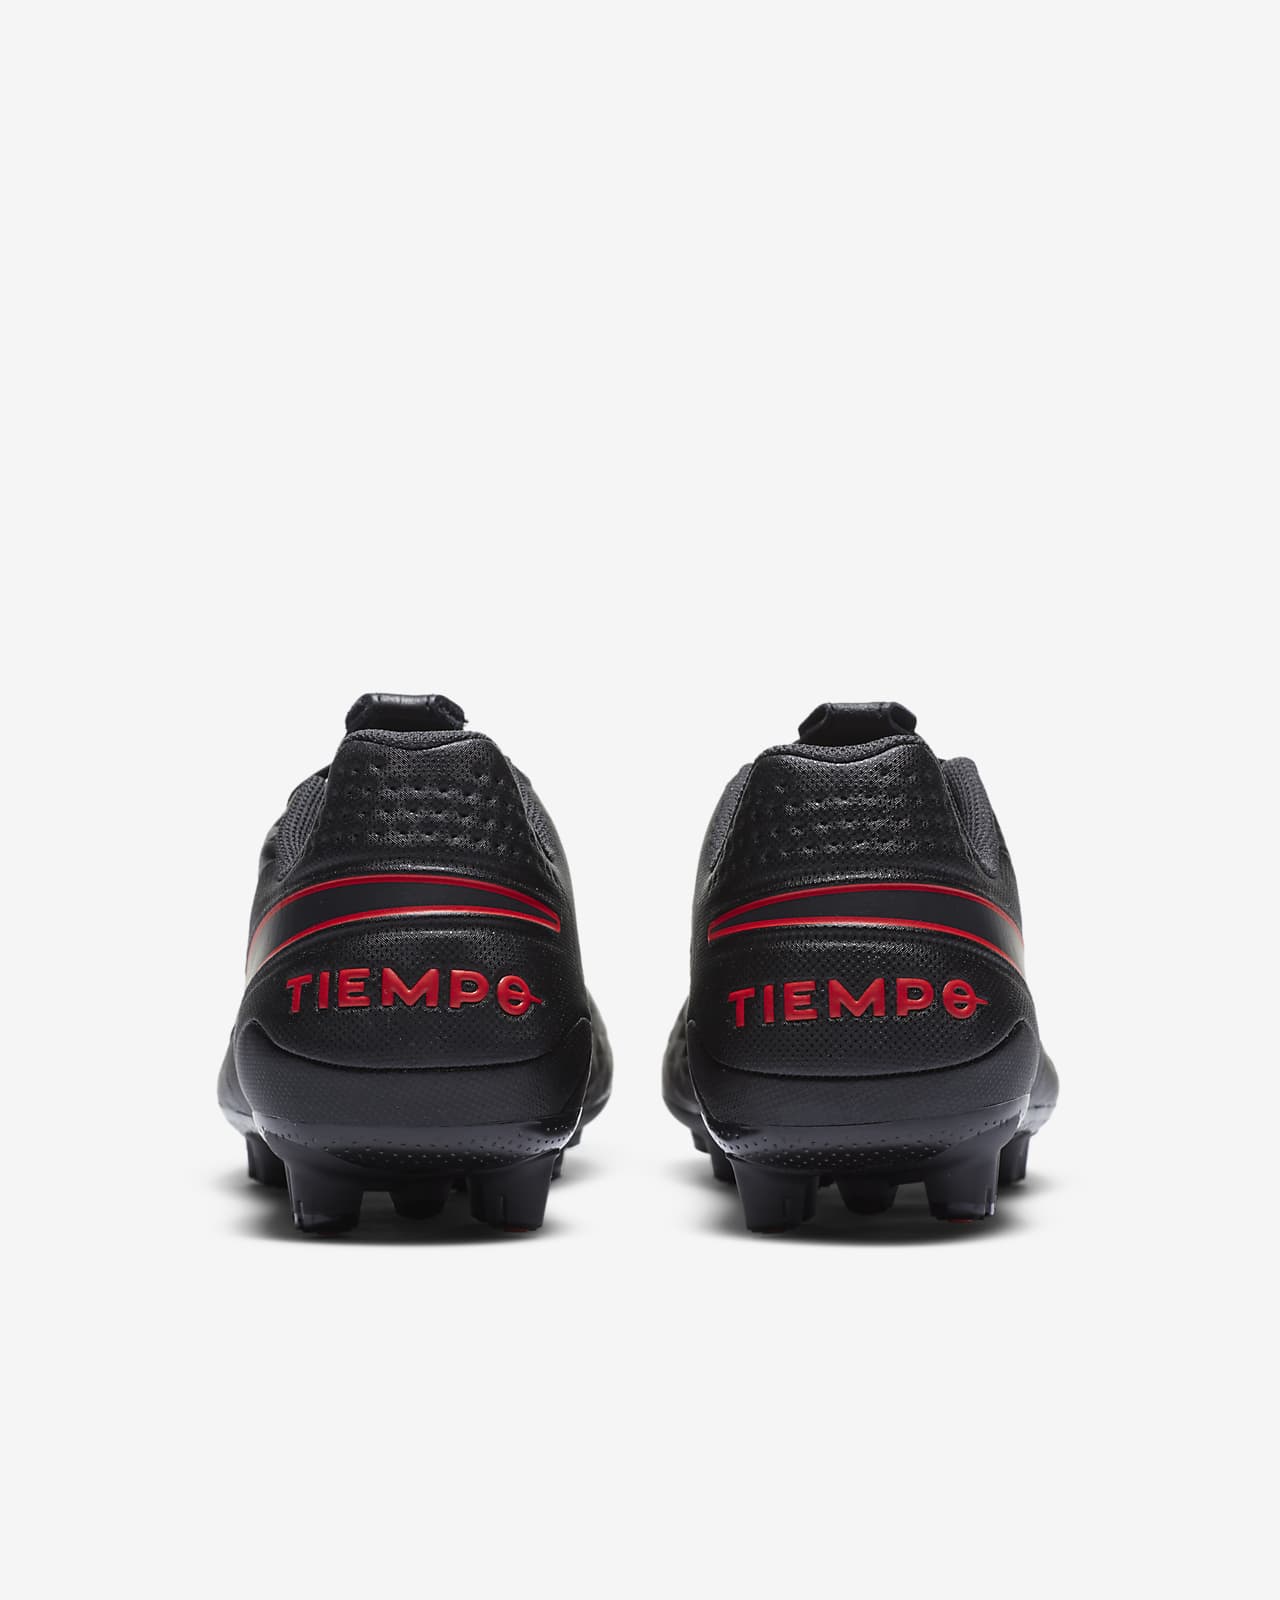 Nike Tiempo Legend 8 Academy Hg Hard Ground Soccer Cleat Nike Jp